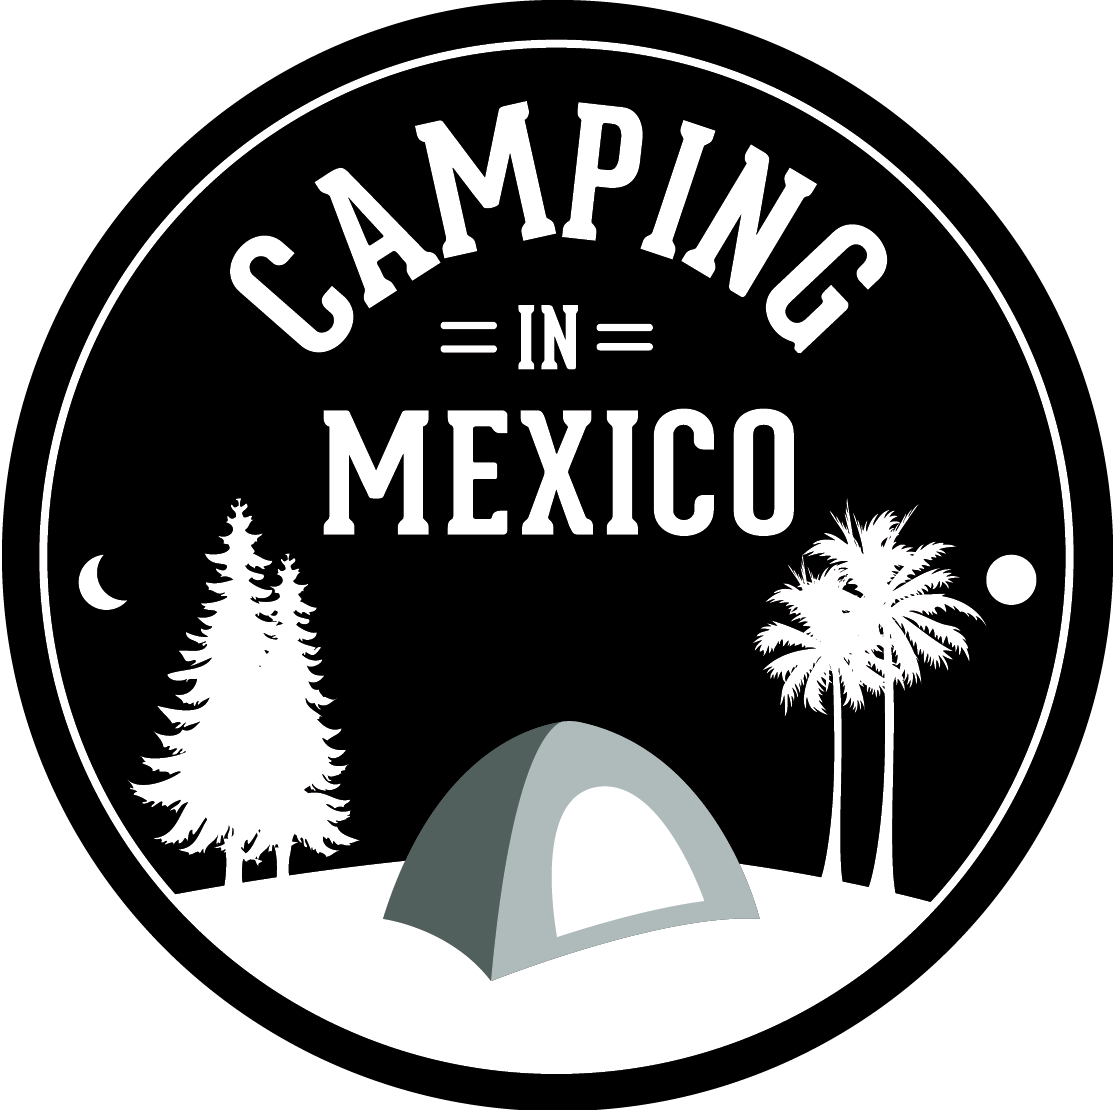 CAMPING IN MEXICO